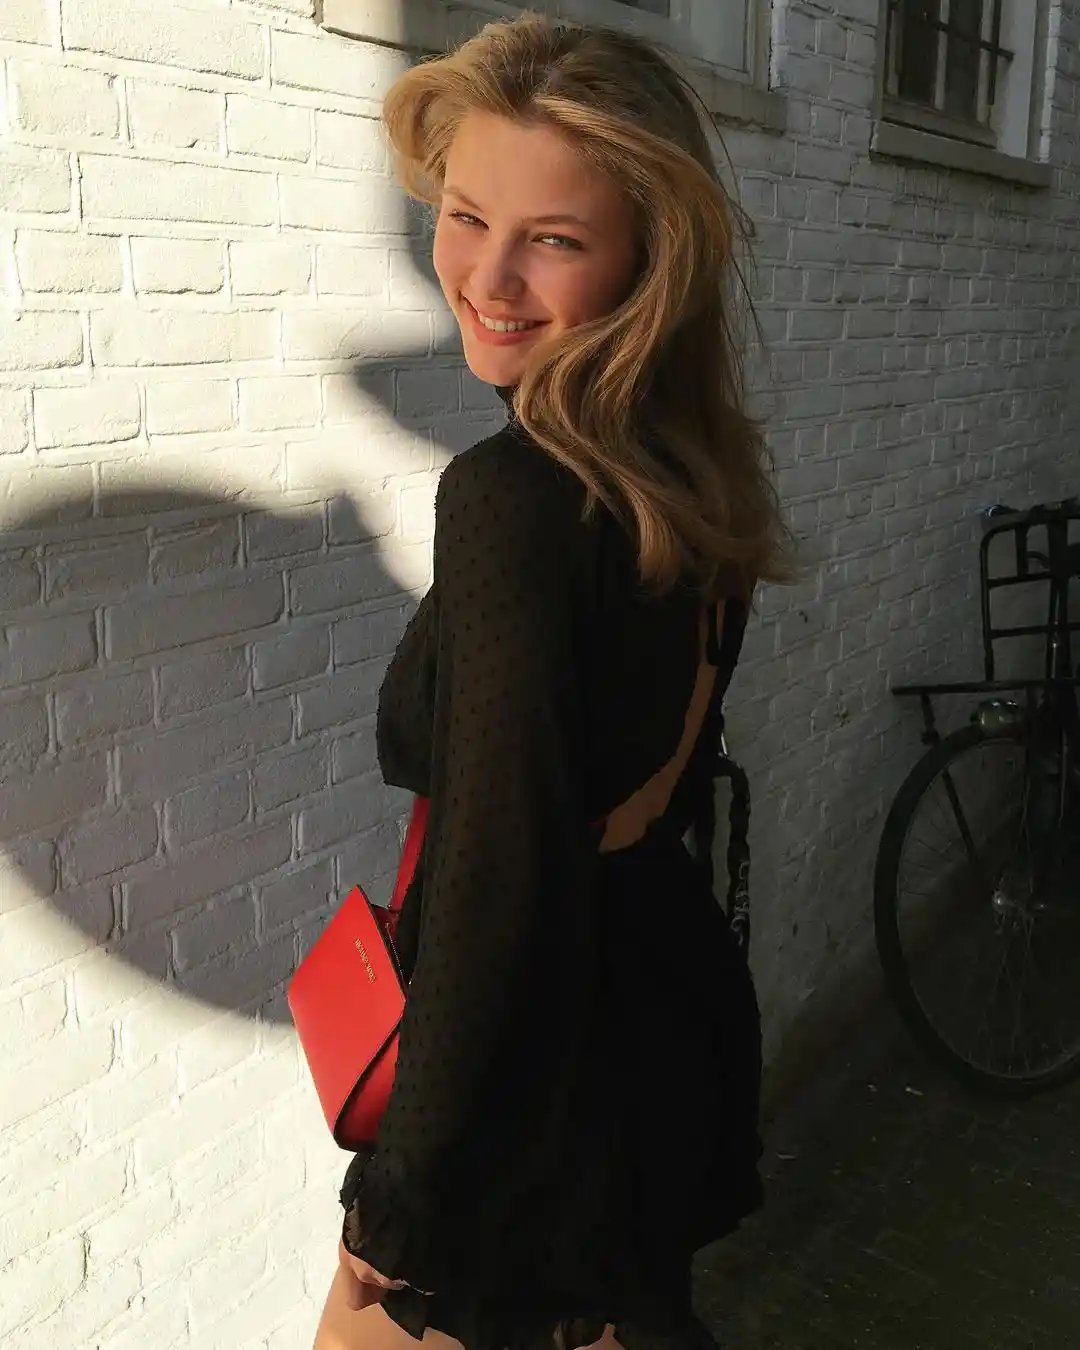 chana kesselaar smiling and wearing black dress and red purse